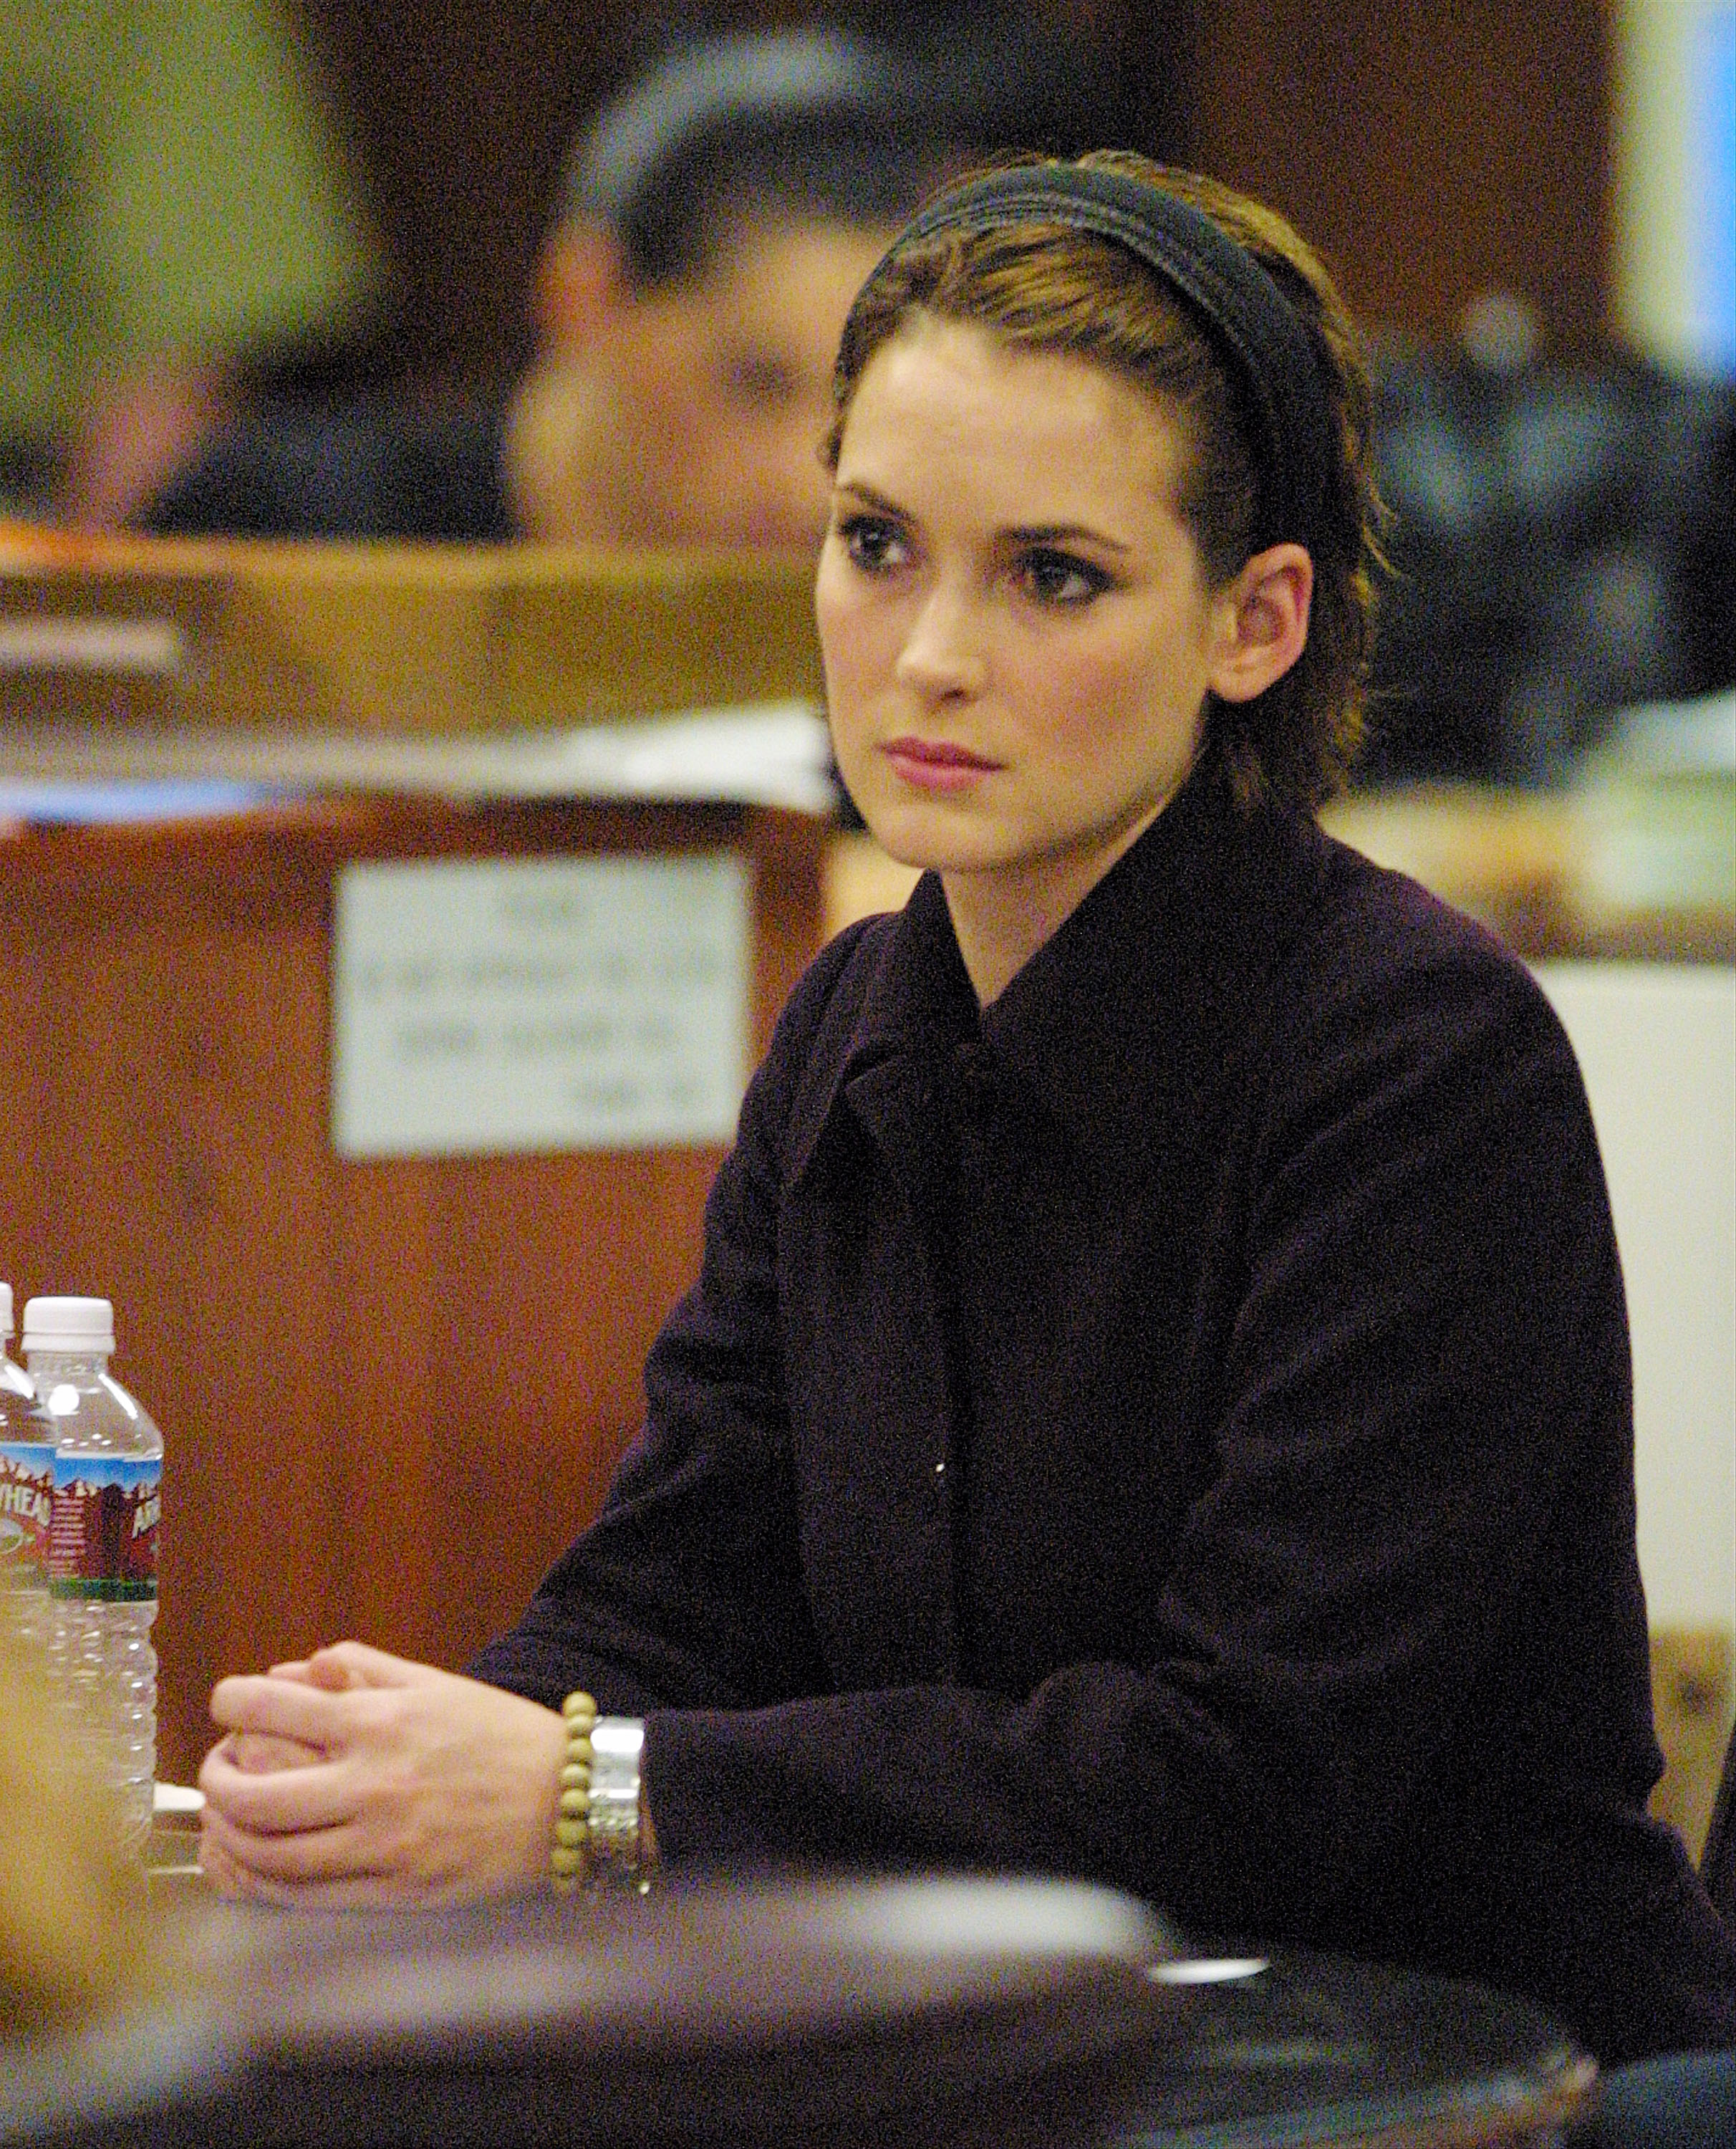 Winona Ryder during the verdict on the eighth day of her shoplifting trial in Beverly Hills, 2002 | Source: Getty Images